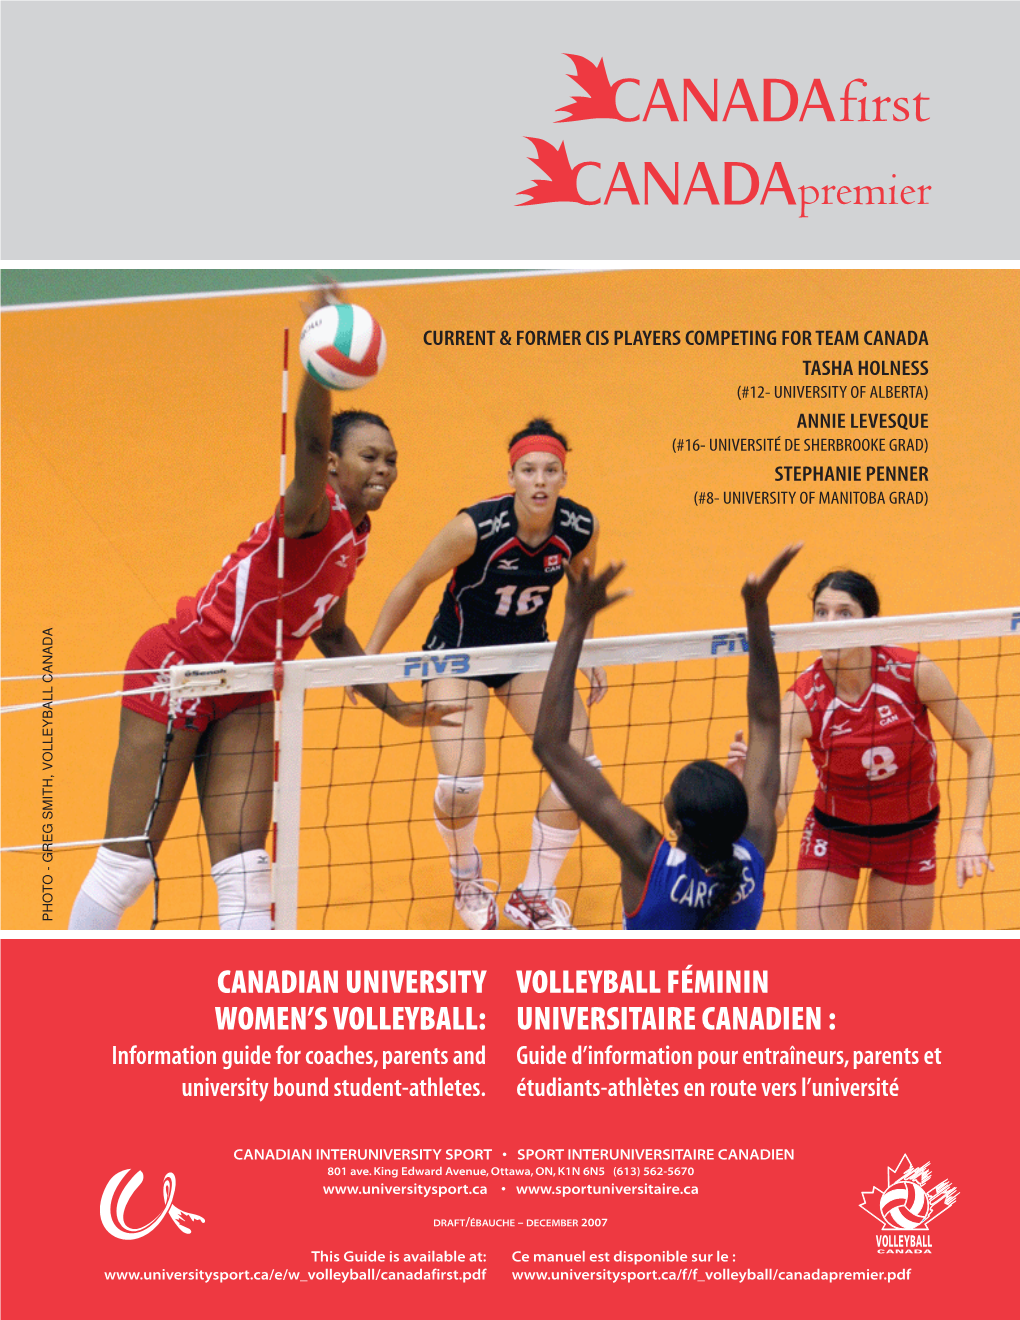 Canada 1St Volleyball B 3/5/08 3:22 PM Page 1